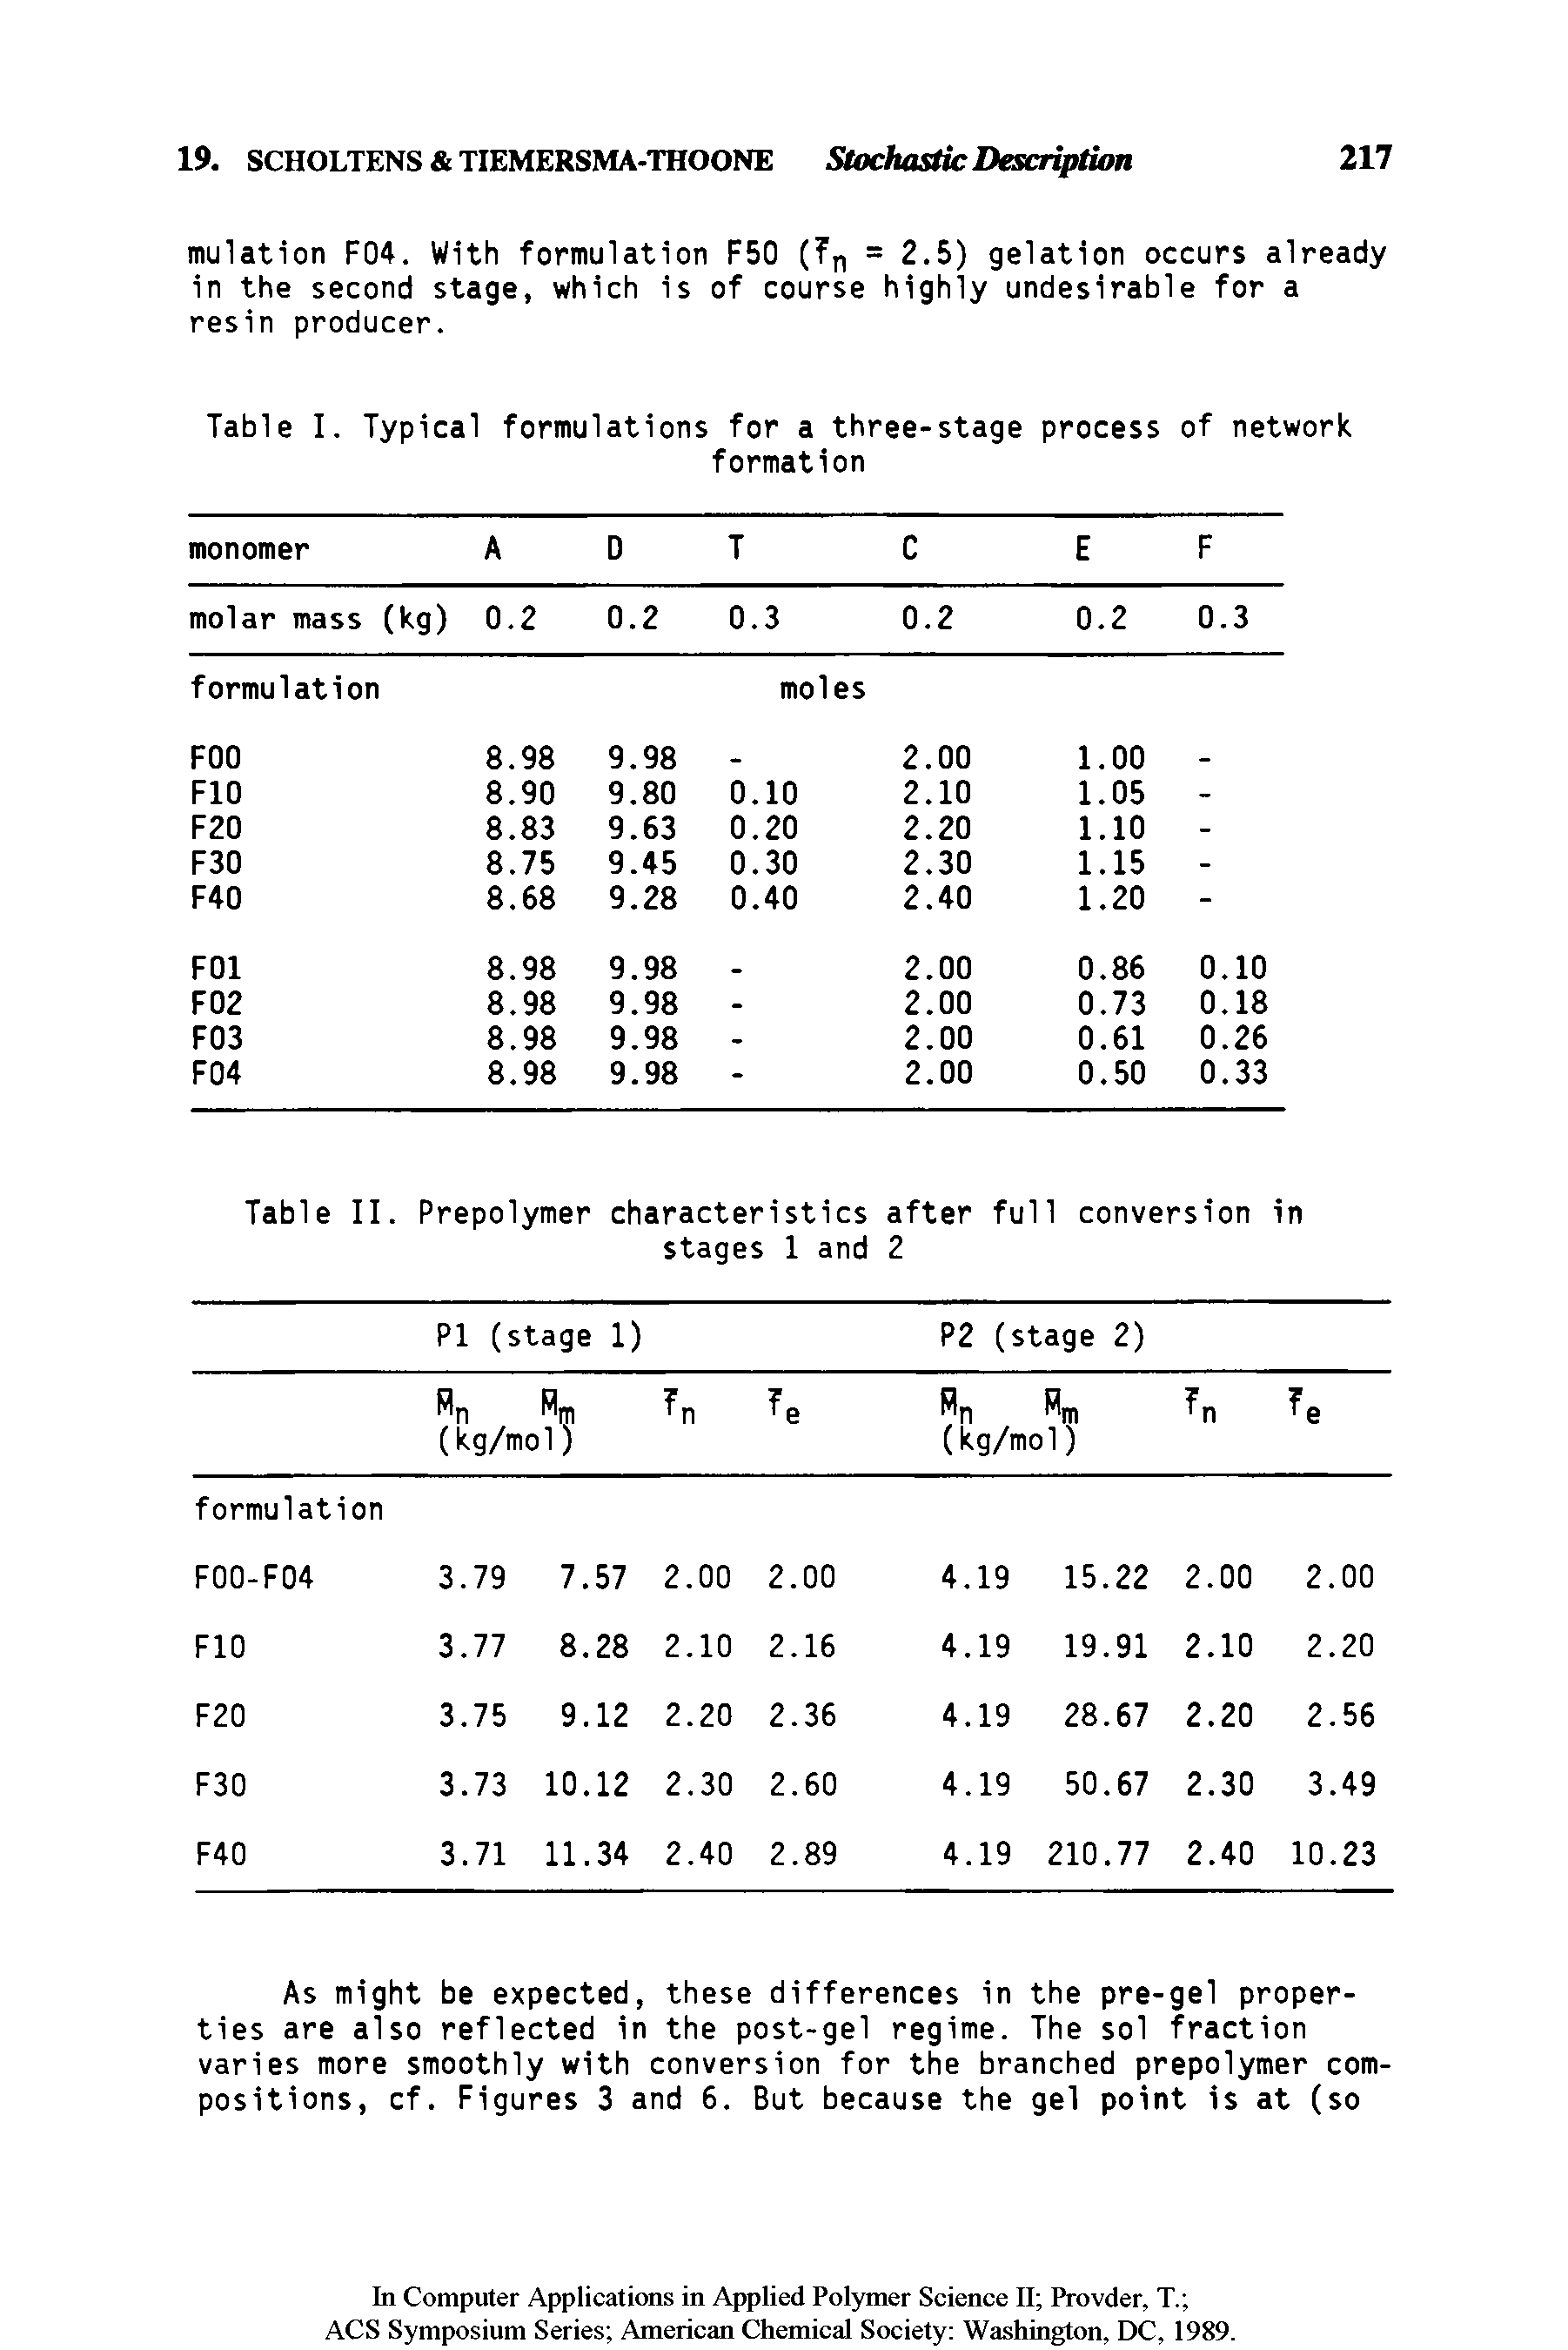 Table I. Typical formulations for a three-stage process of network...